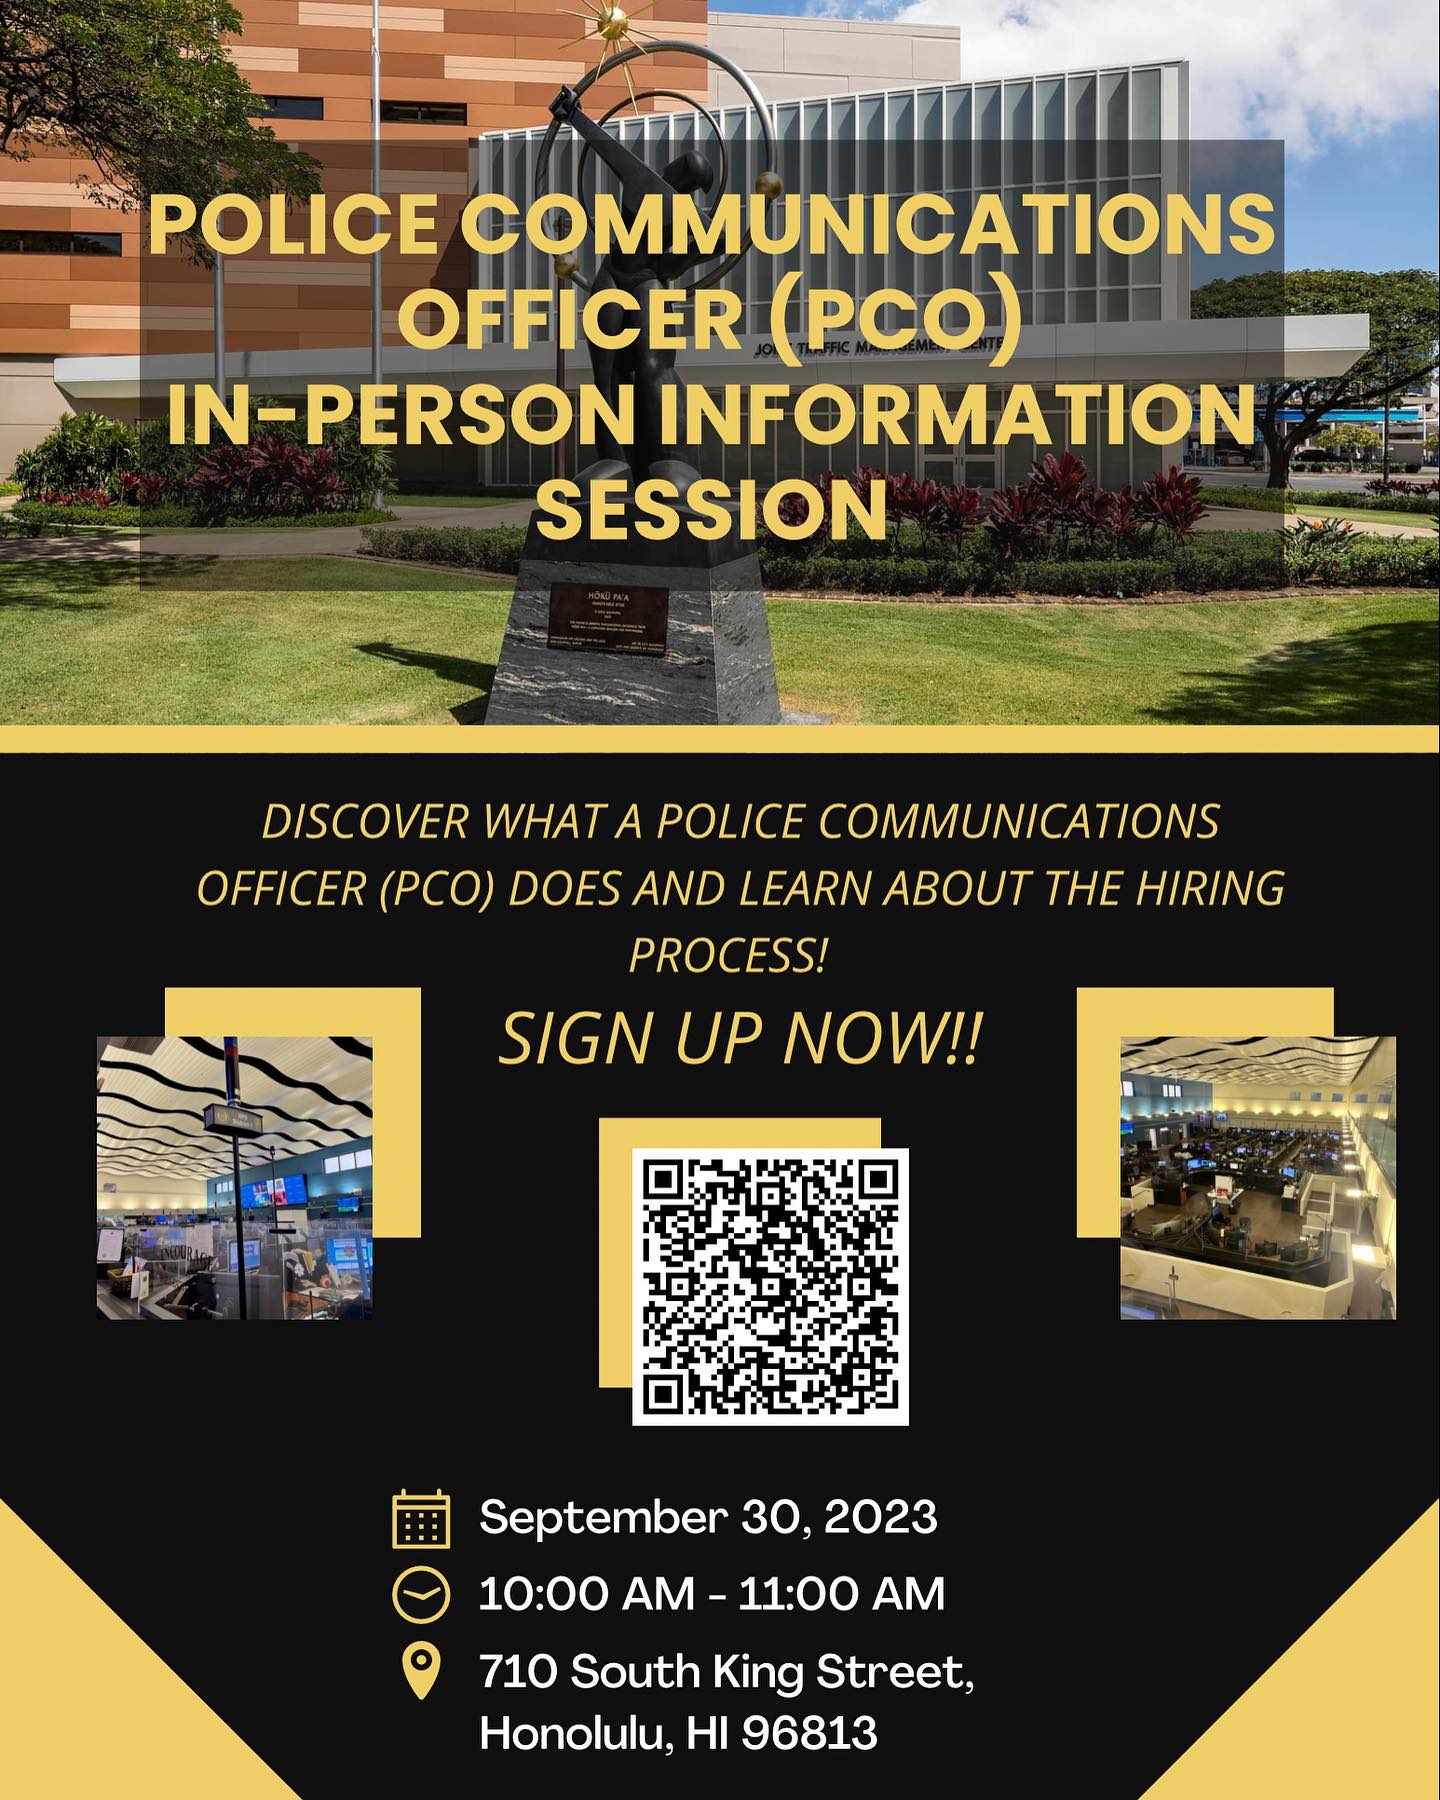 Flyer for an upcoming Police Communications Officer Information Session (In Person)